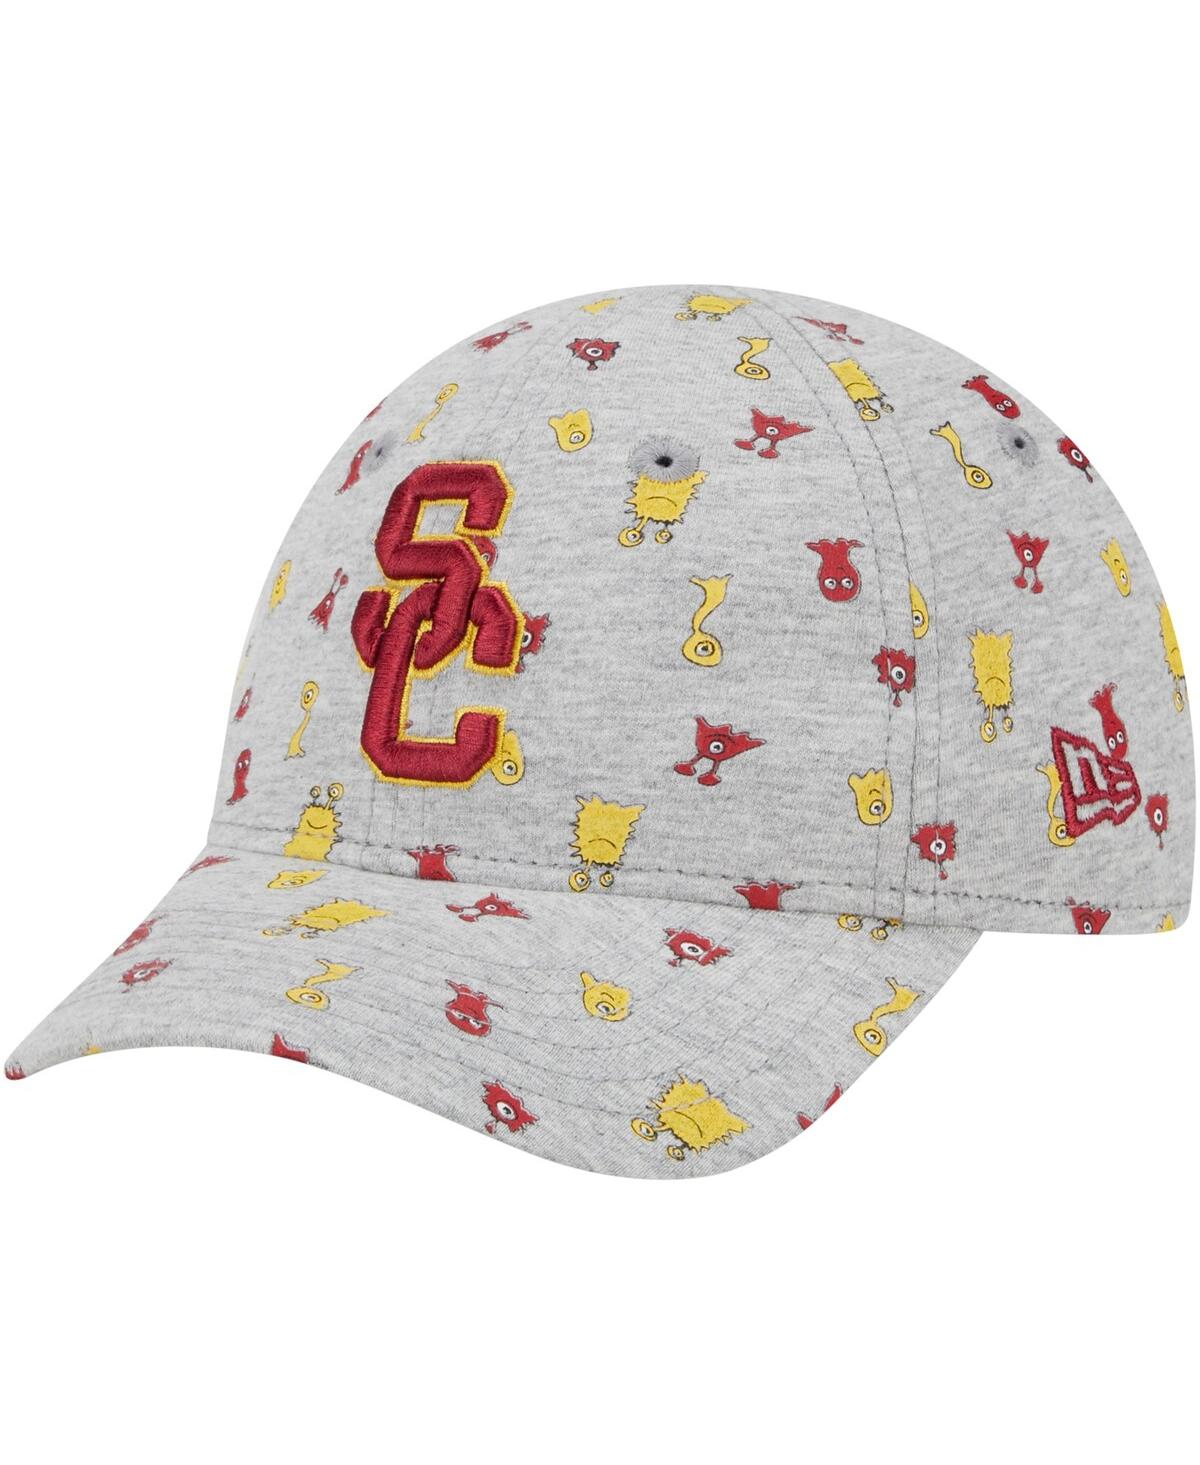 New Era Babies' Toddler Boys And Girls  Heather Gray Usc Trojans Allover Print Critter 9forty Flex Hat